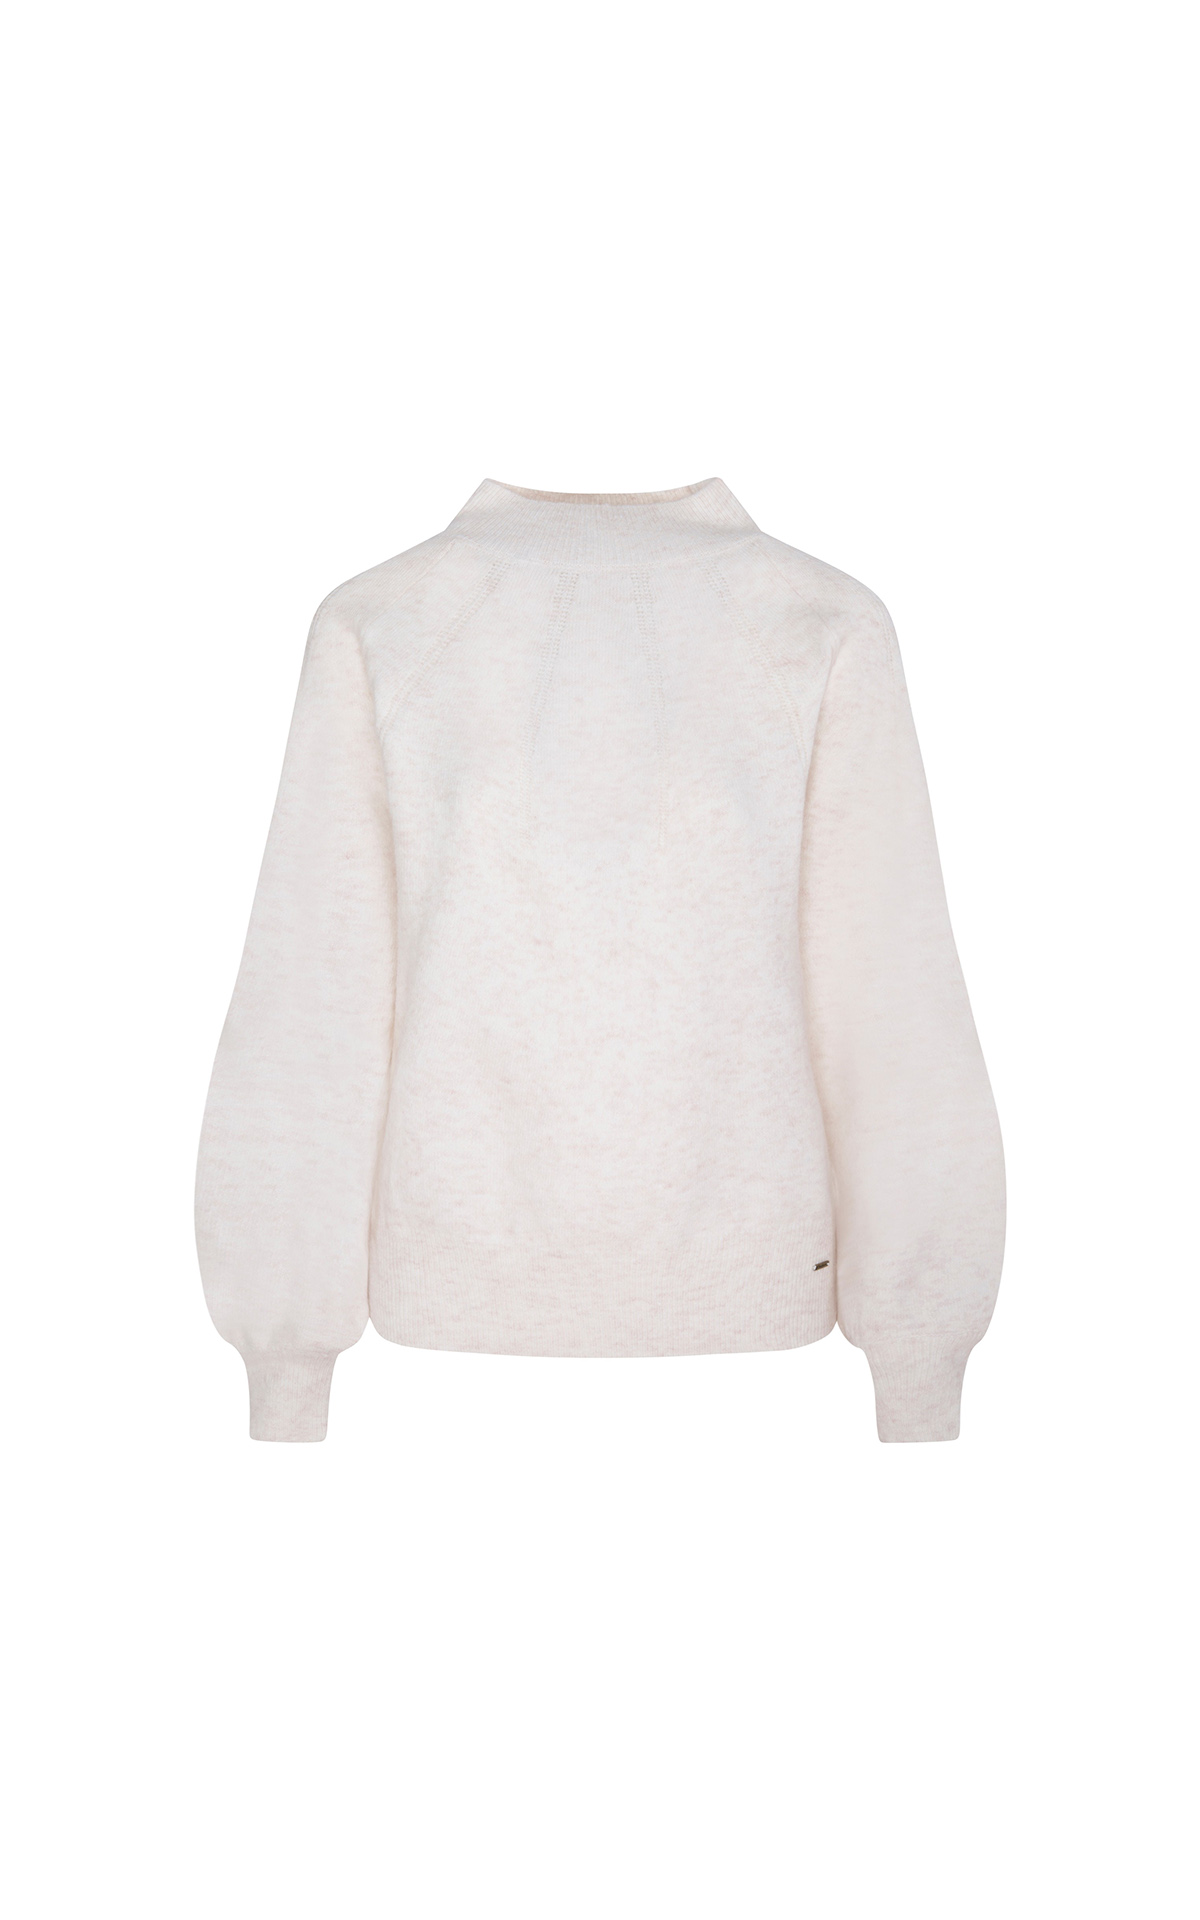 White sweater pepe jeans